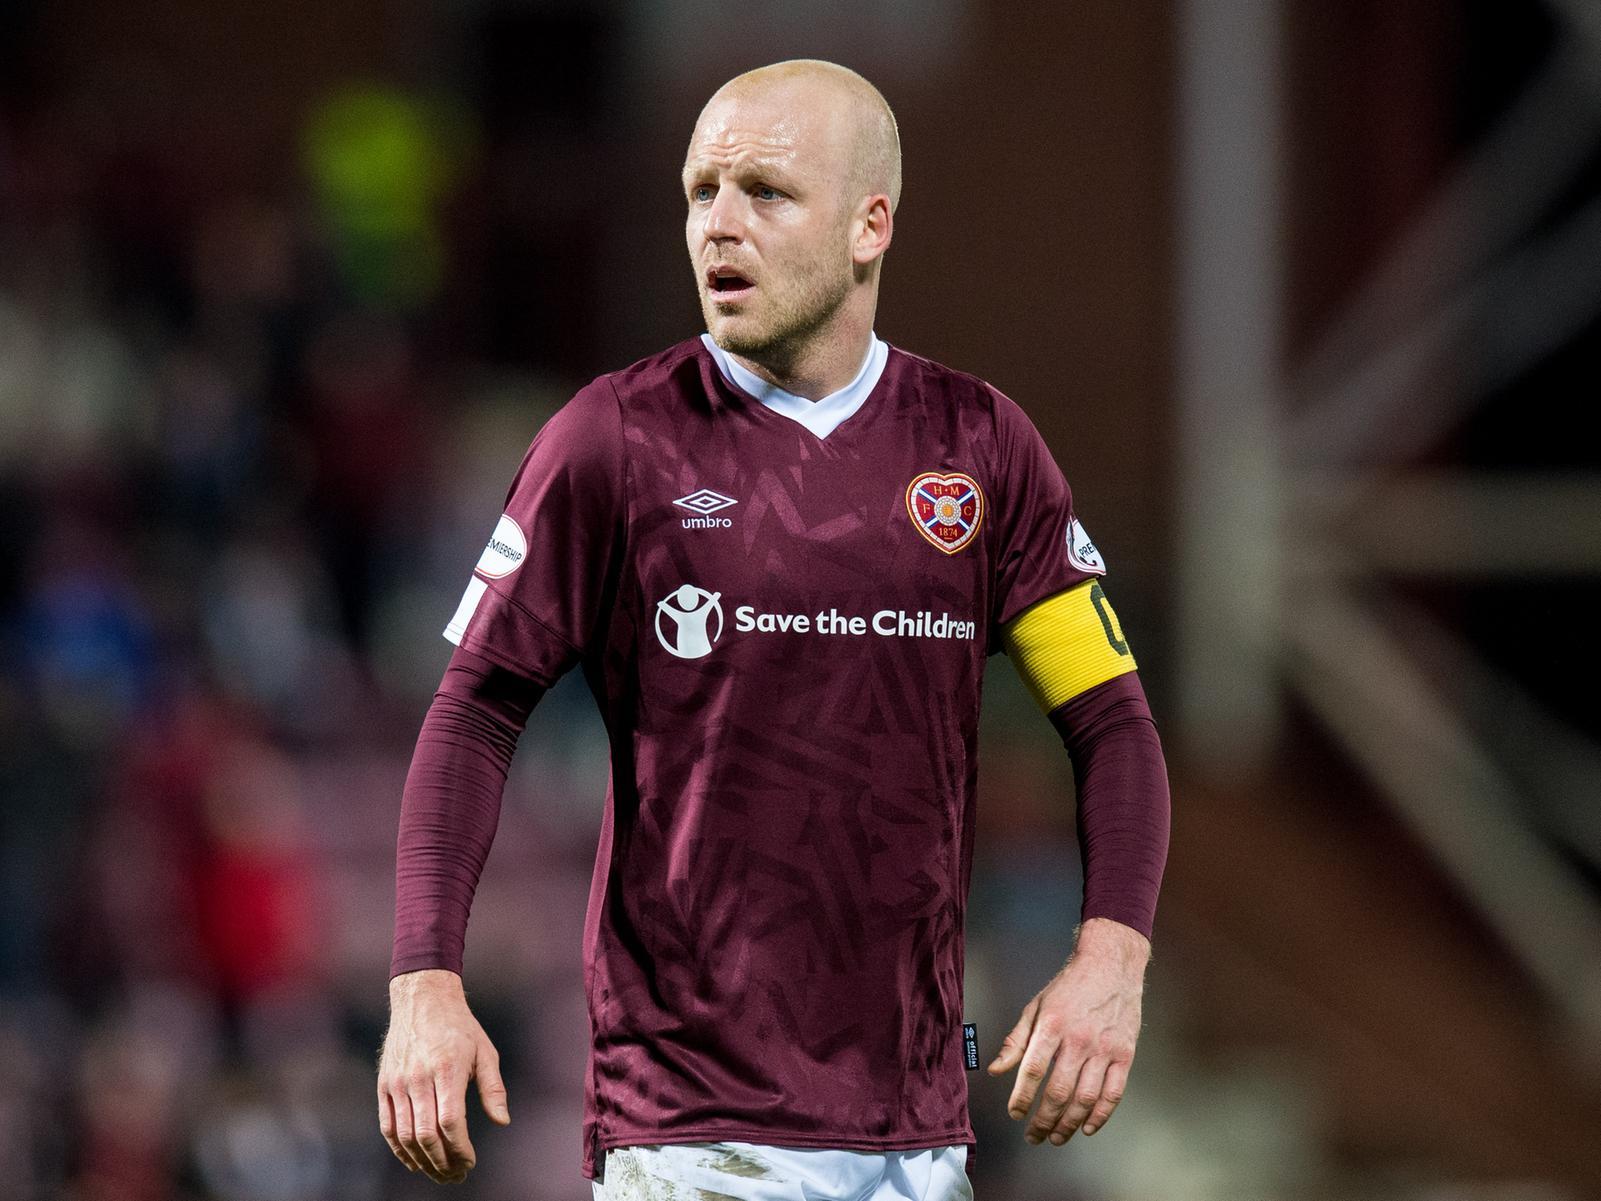 The captain played a key role in helping Hearts produce a competitive first-half display and saw a powerful half-volley go just wide. Stuck to his task in second half but Celtic were simply too strong.